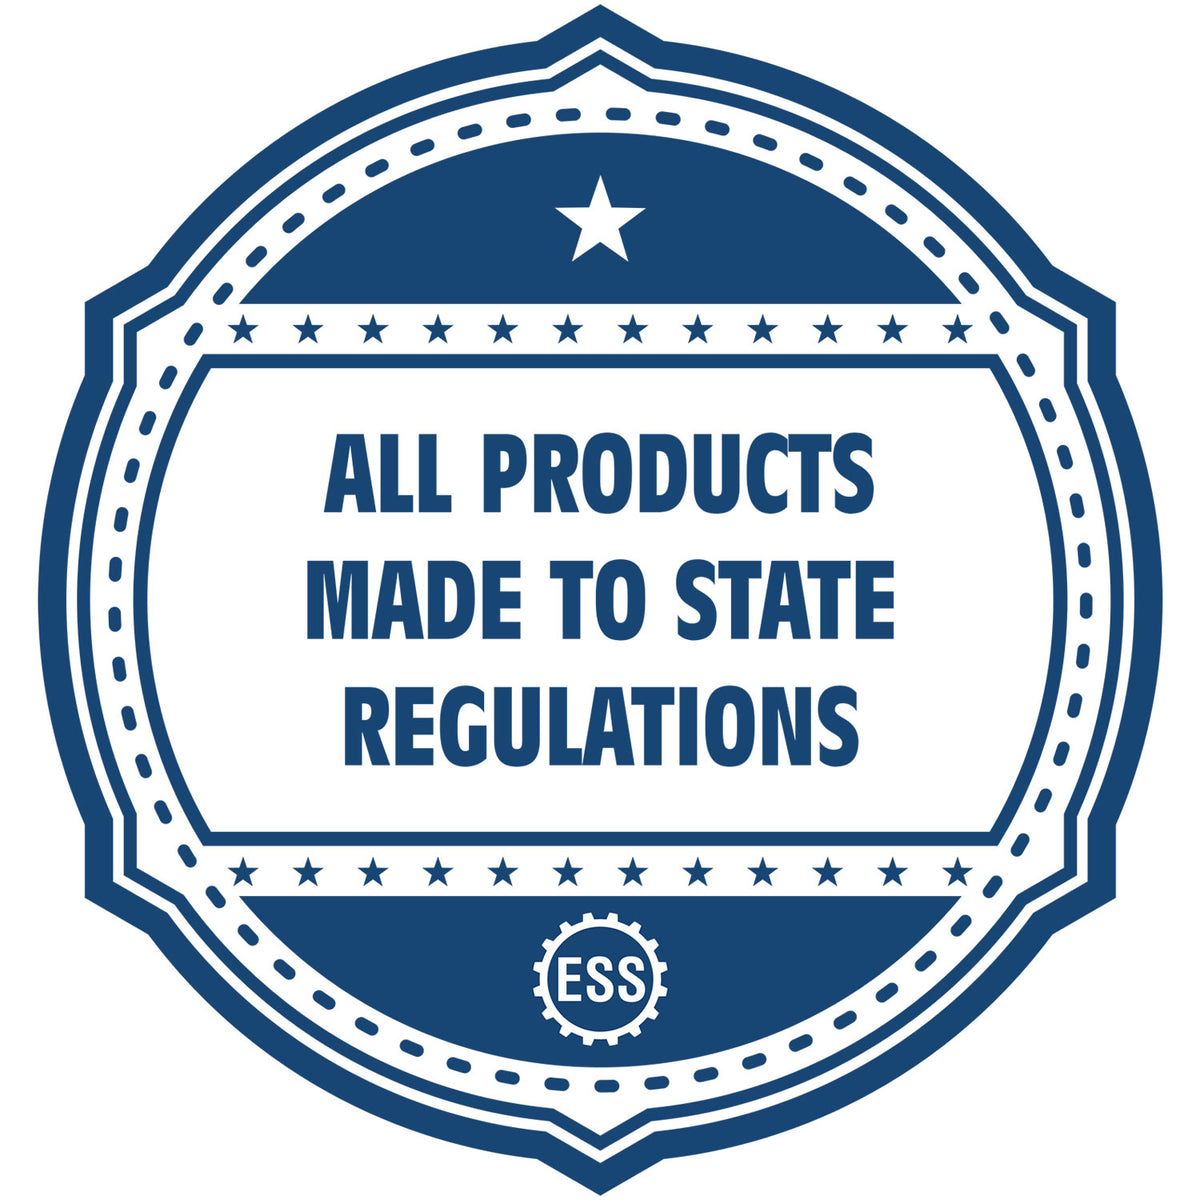 An icon or badge element for the State of Maine Long Reach Architectural Embossing Seal showing that this product is made in compliance with state regulations.